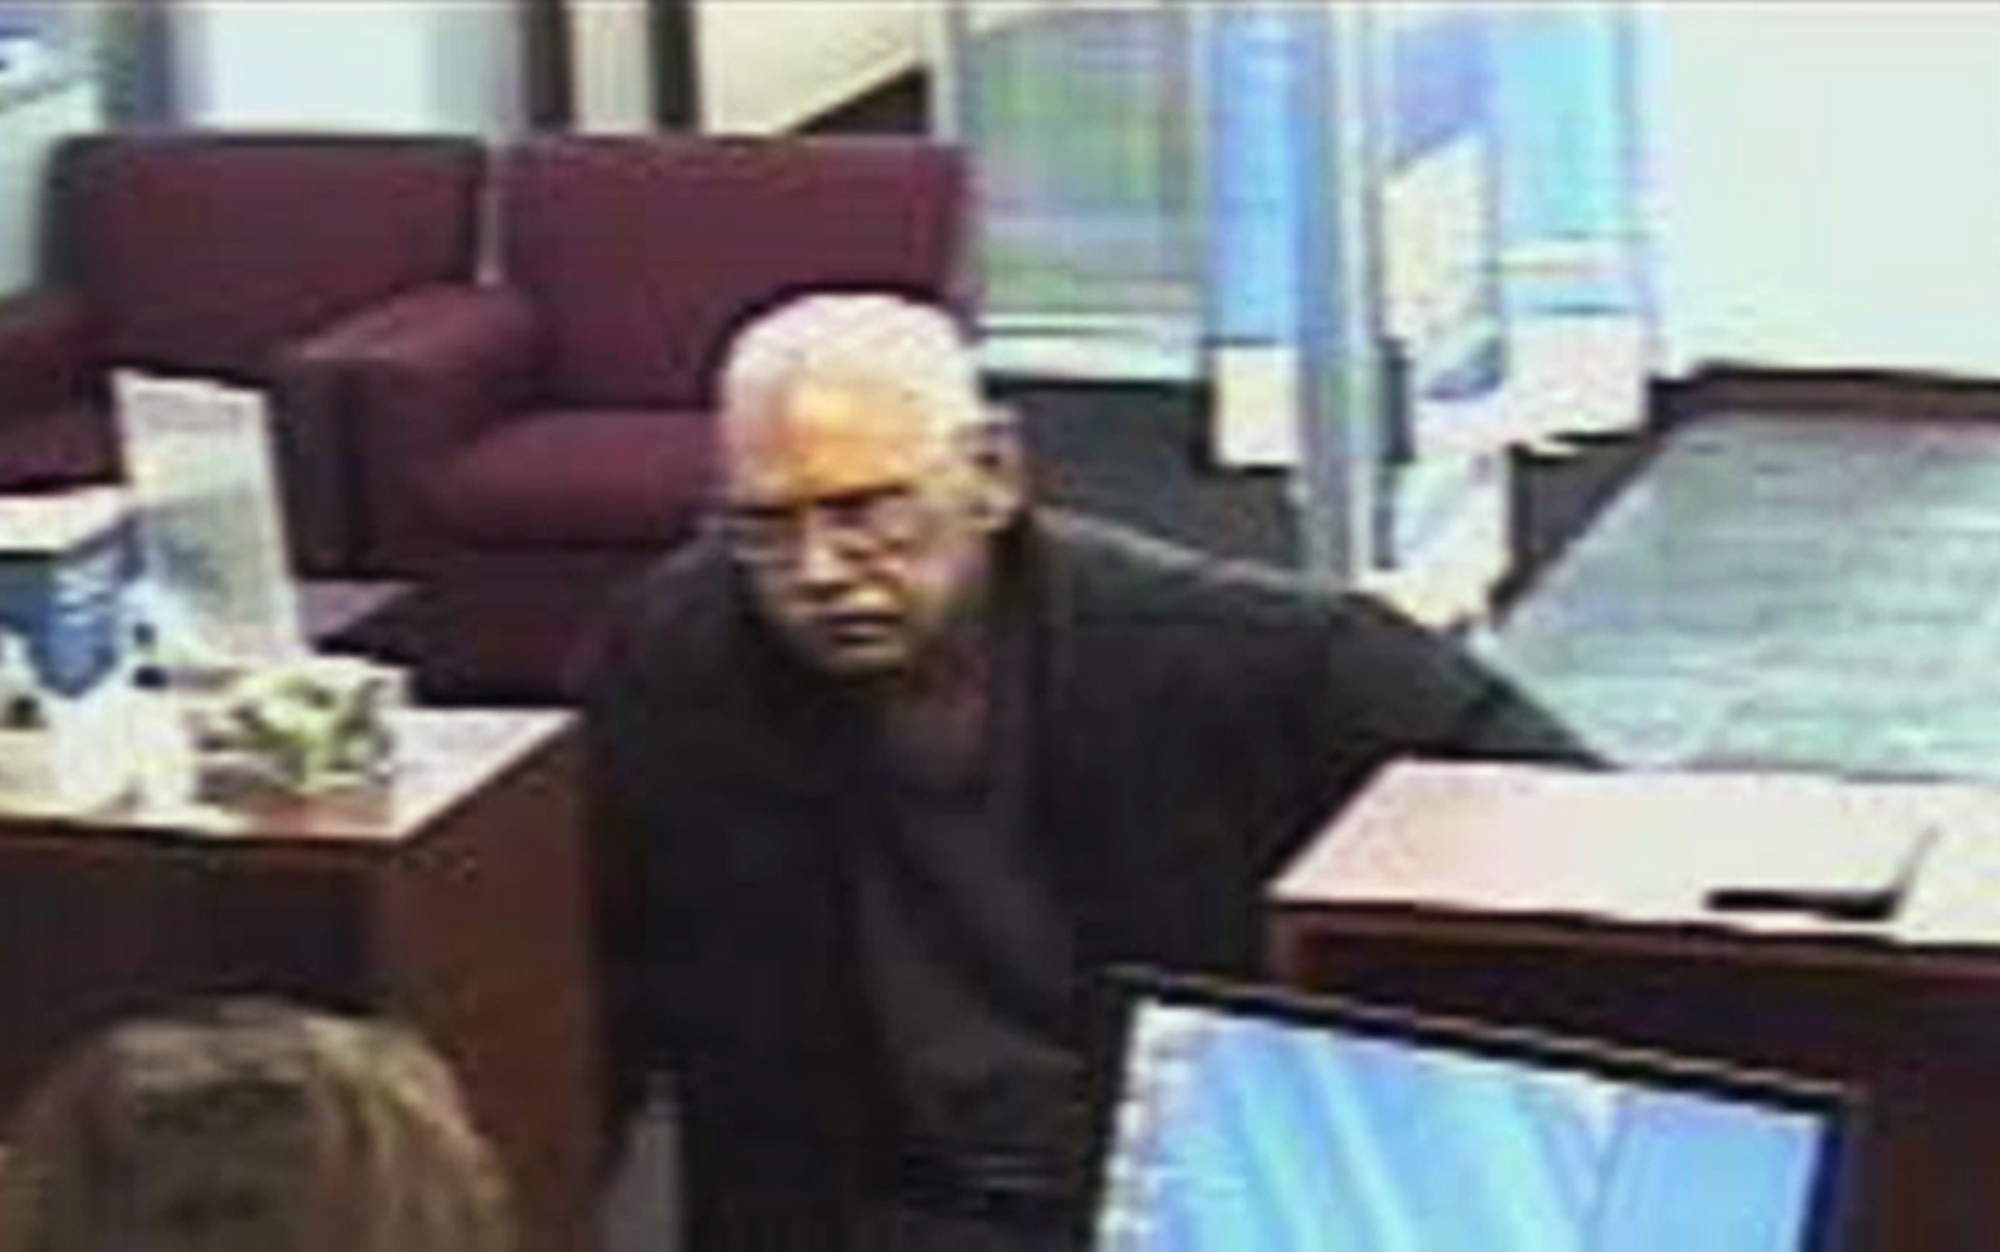 This Feb. 9, 2013 file surveillance photo provided by the FBI shows 73-year-old Walter Unbehaun, an ex-convict from Rock Hill., S.C., during a bank robbery in Niles, Ill. Unbehaun allegedly told investigators he intended to get caught so he could live his final years behind bars. (FBI/AP)